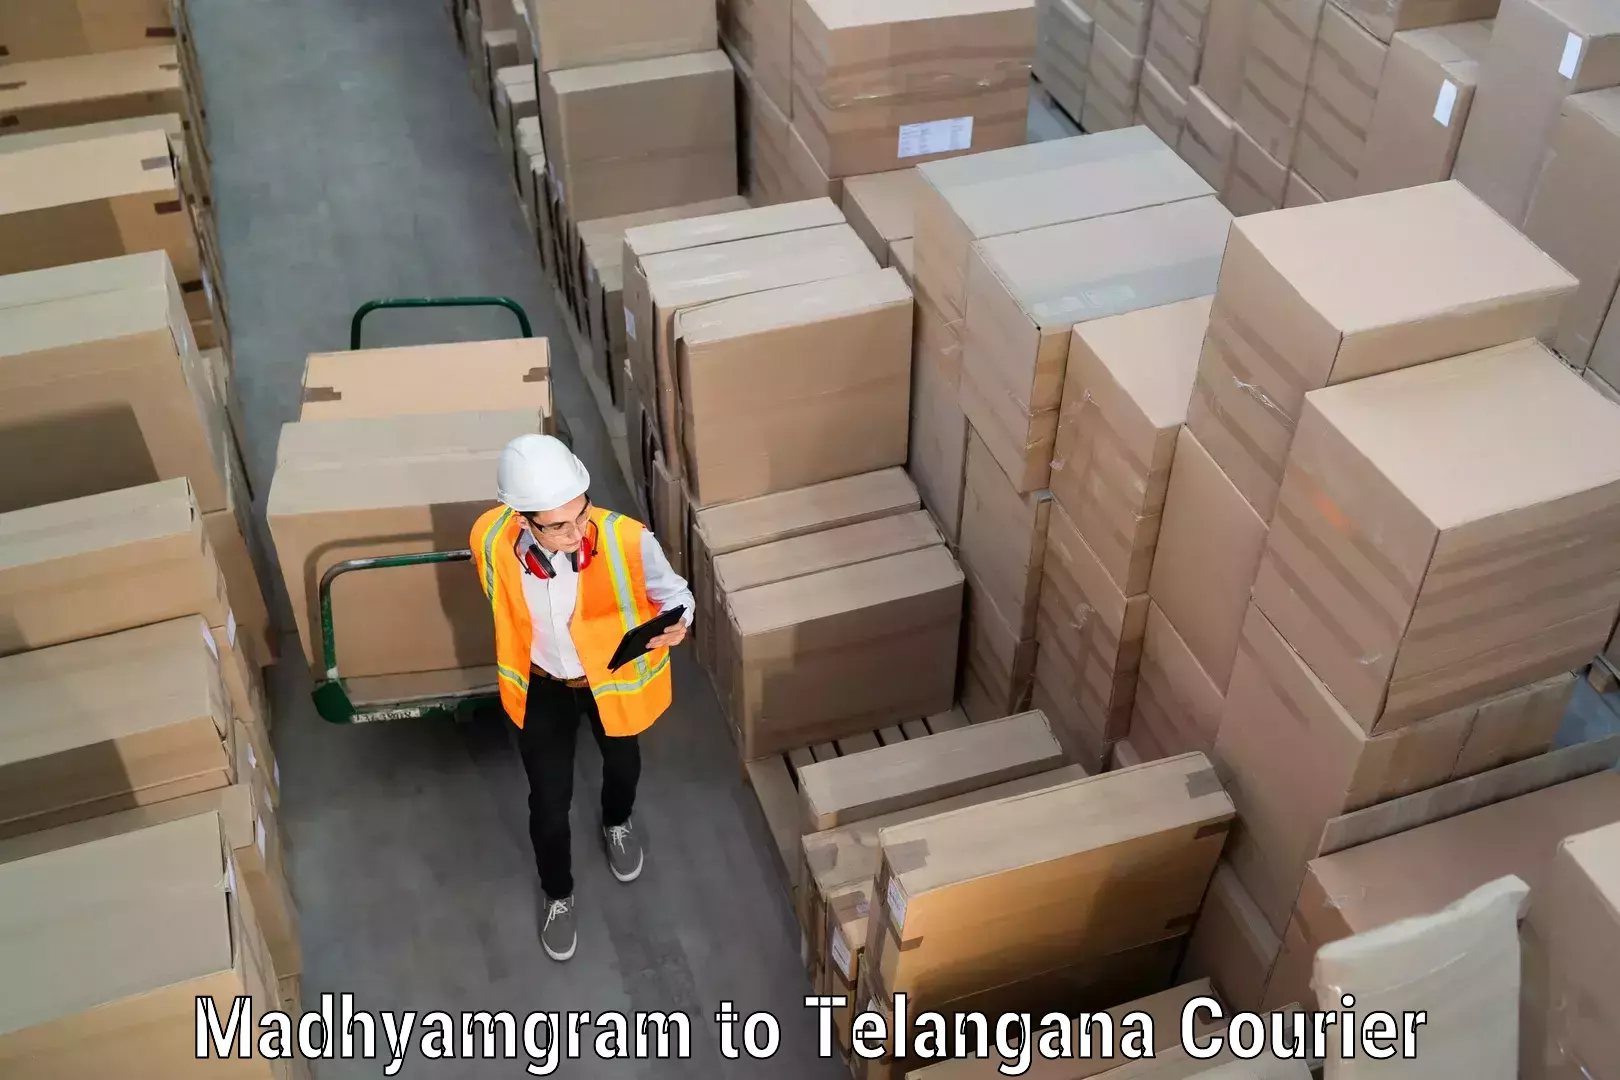 Professional moving assistance in Madhyamgram to Telangana